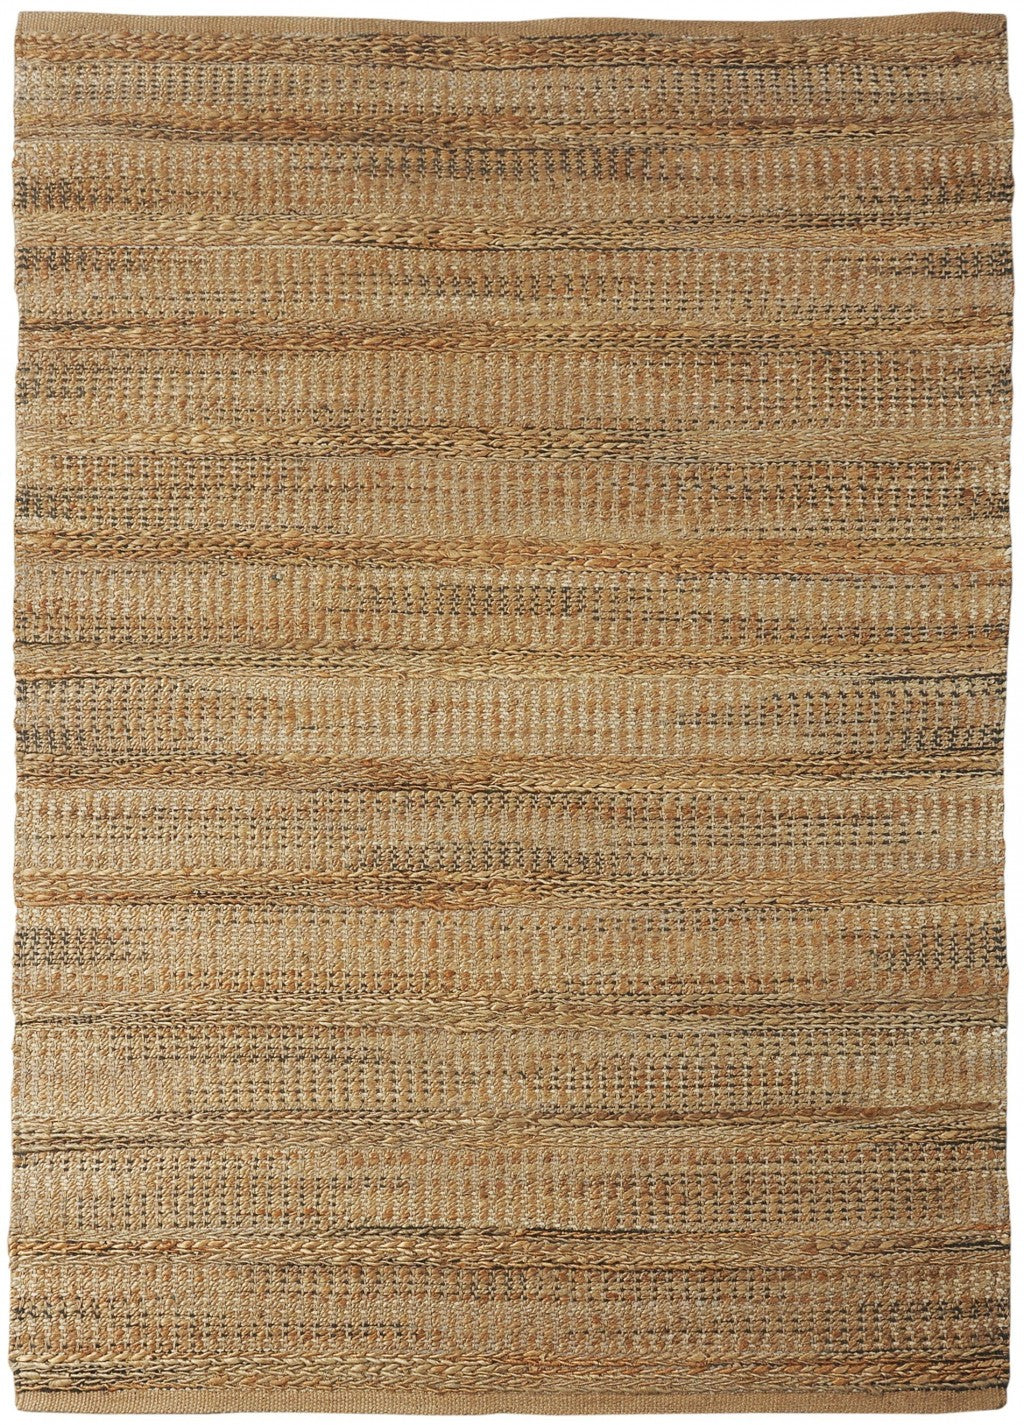 8’ x 10’ Tan and Gray Intricately Handwoven Area Rug